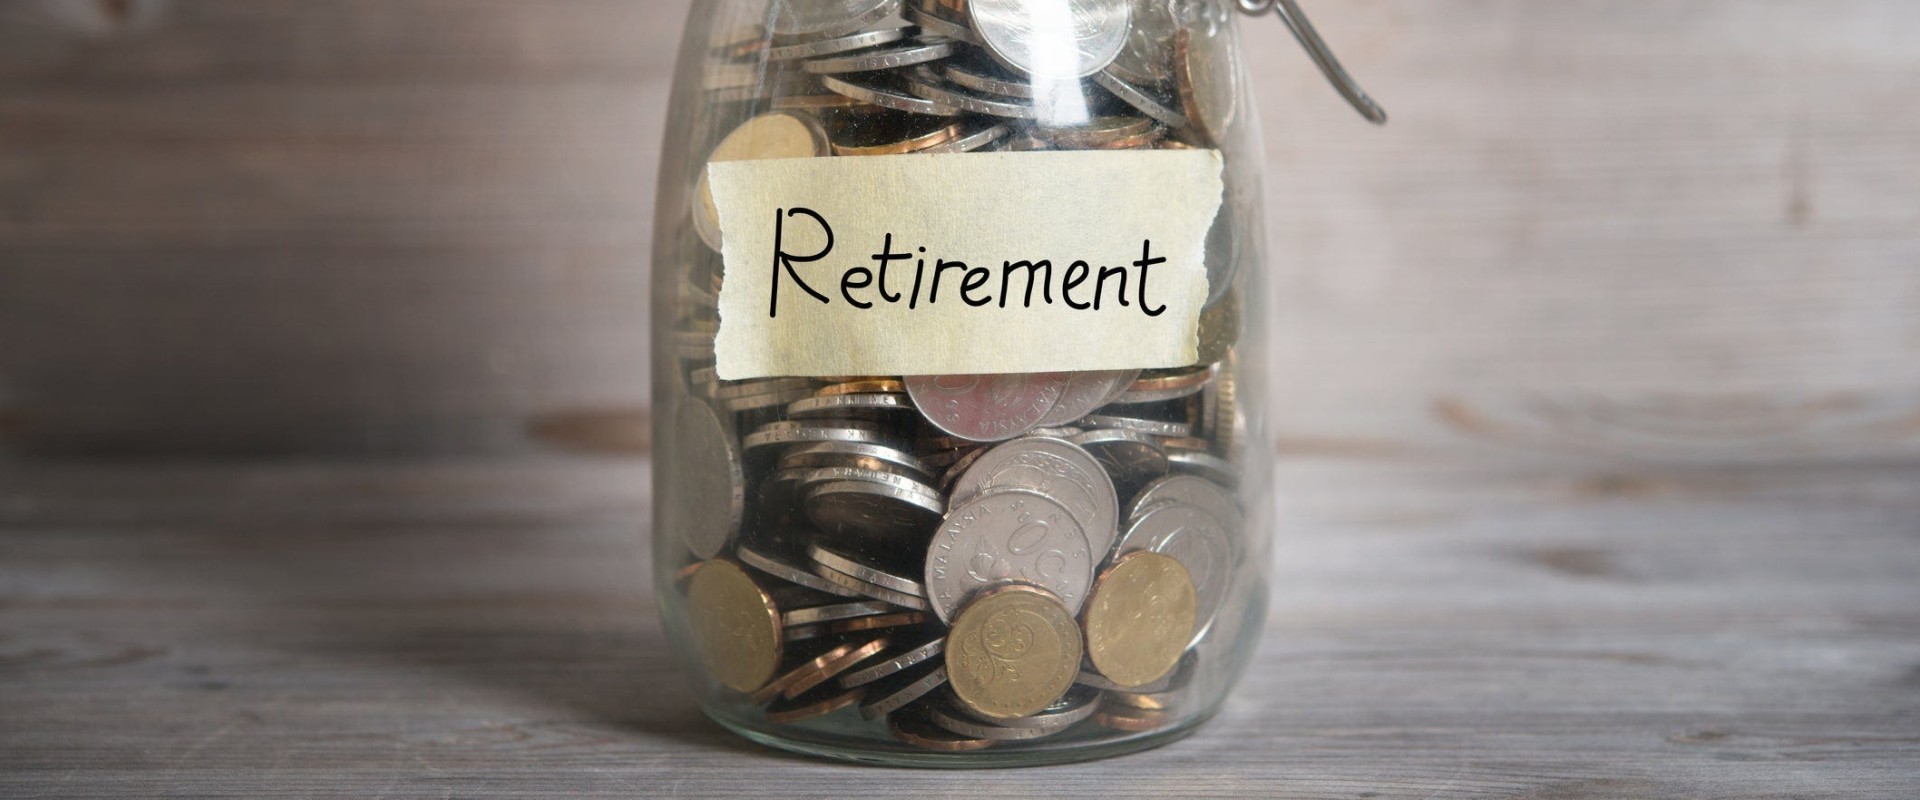 What is a reasonable amount of money to retire with?